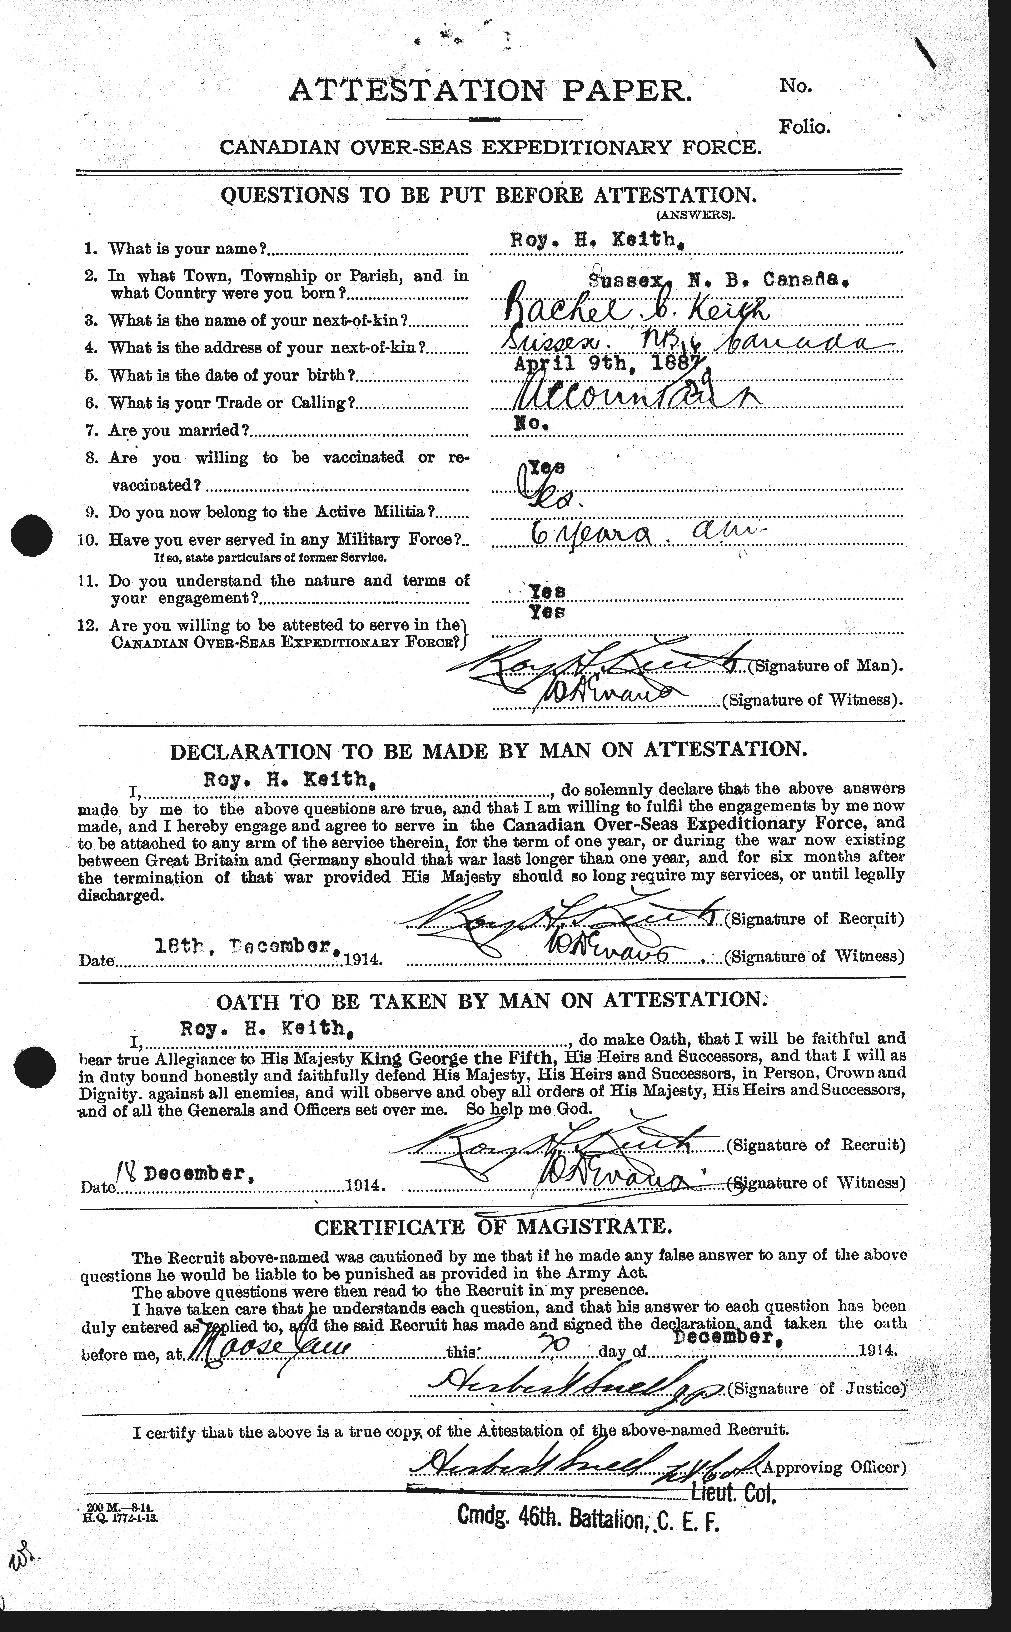 Personnel Records of the First World War - CEF 432497a